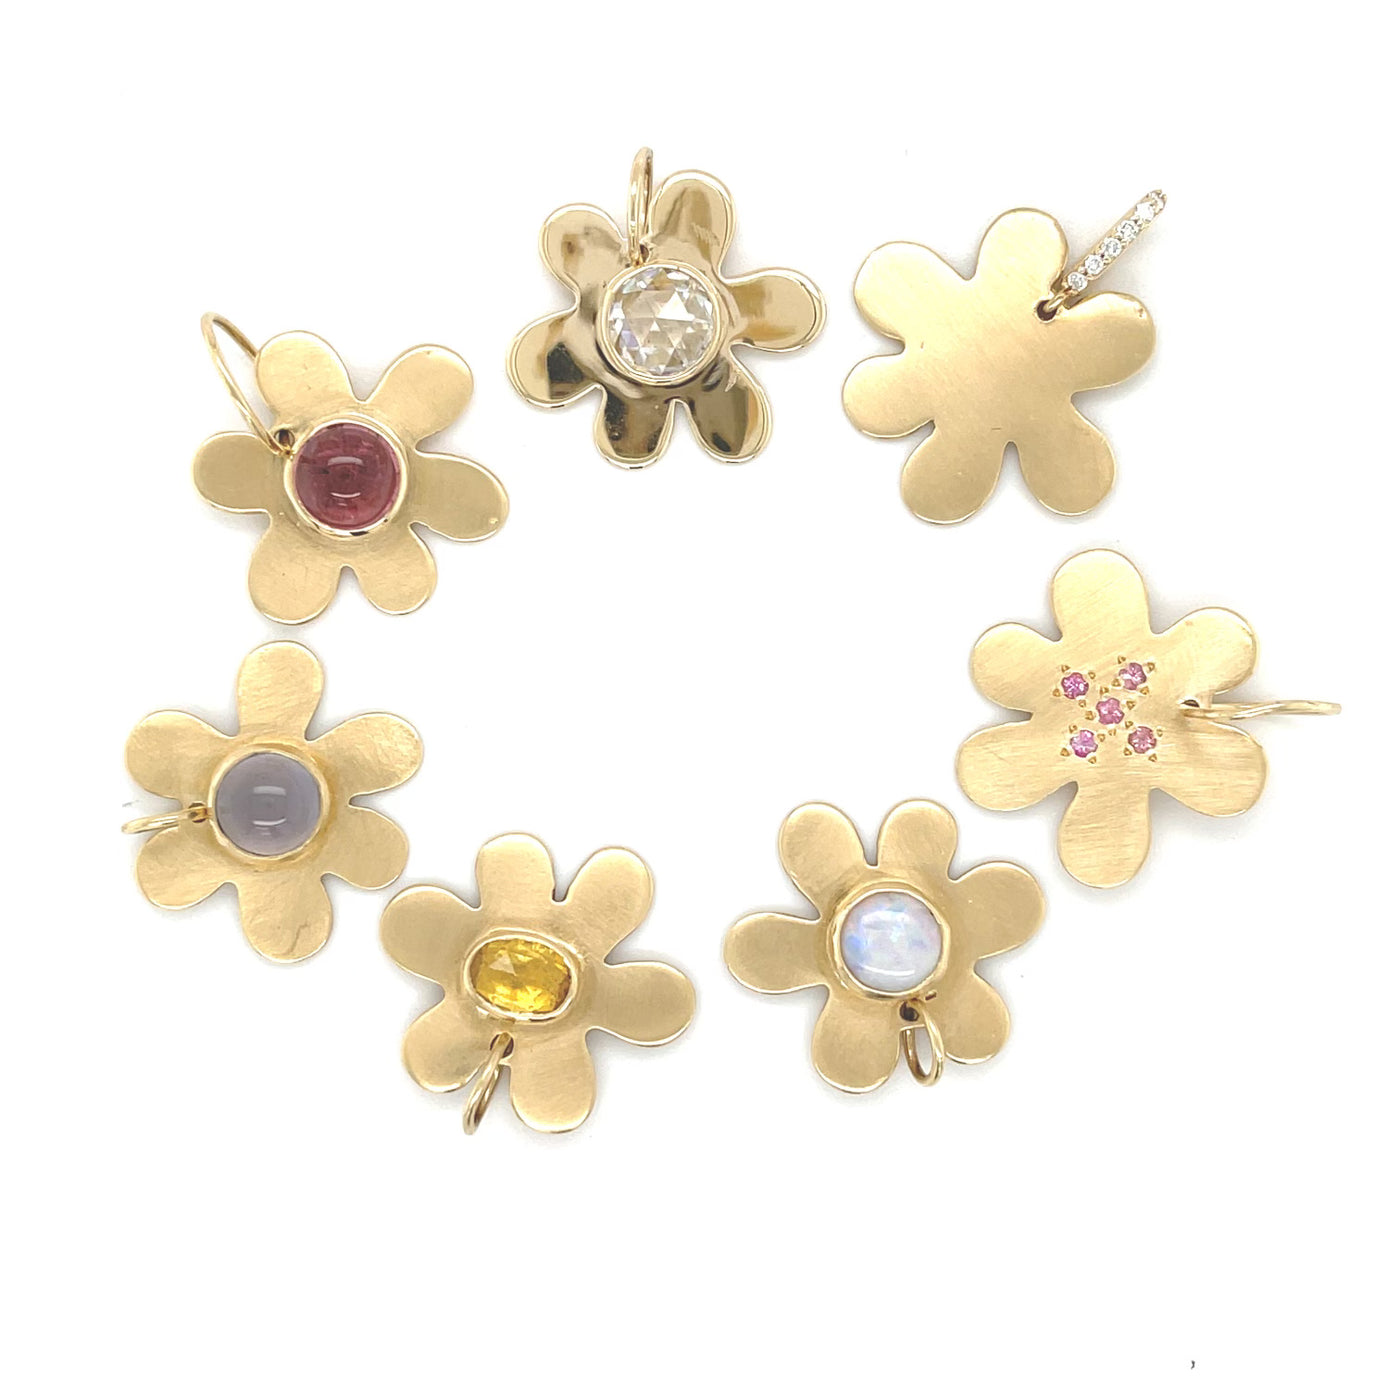 Daisy Charm with Yellow Sapphire